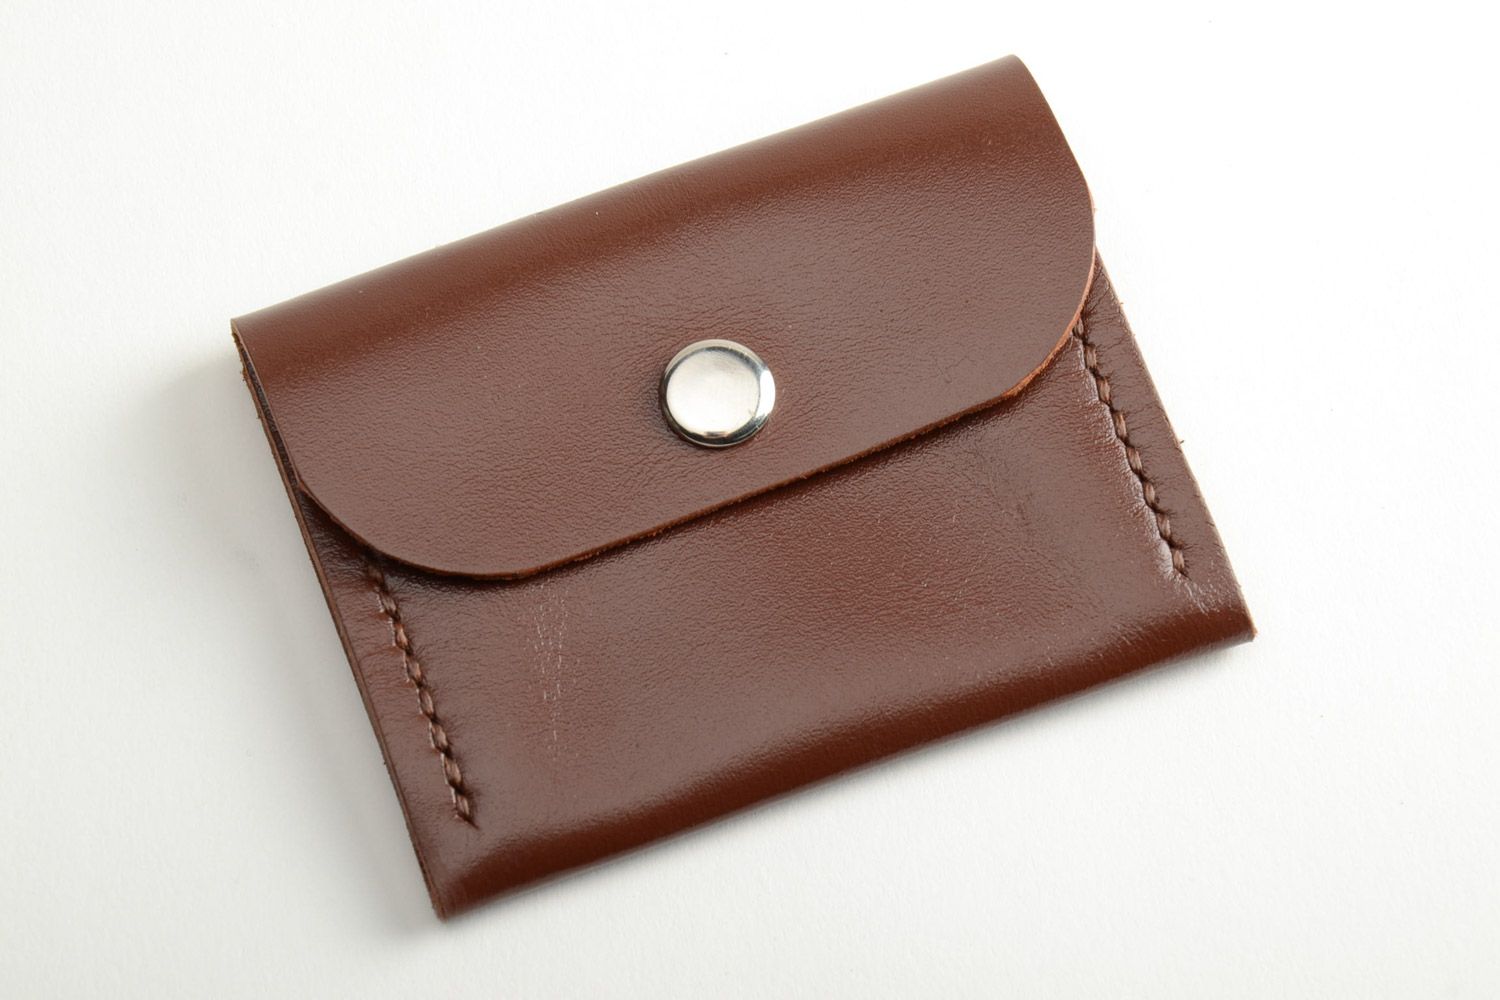 Handmade men's coin purse sewn of genuine leather of brown color with metal stud photo 2